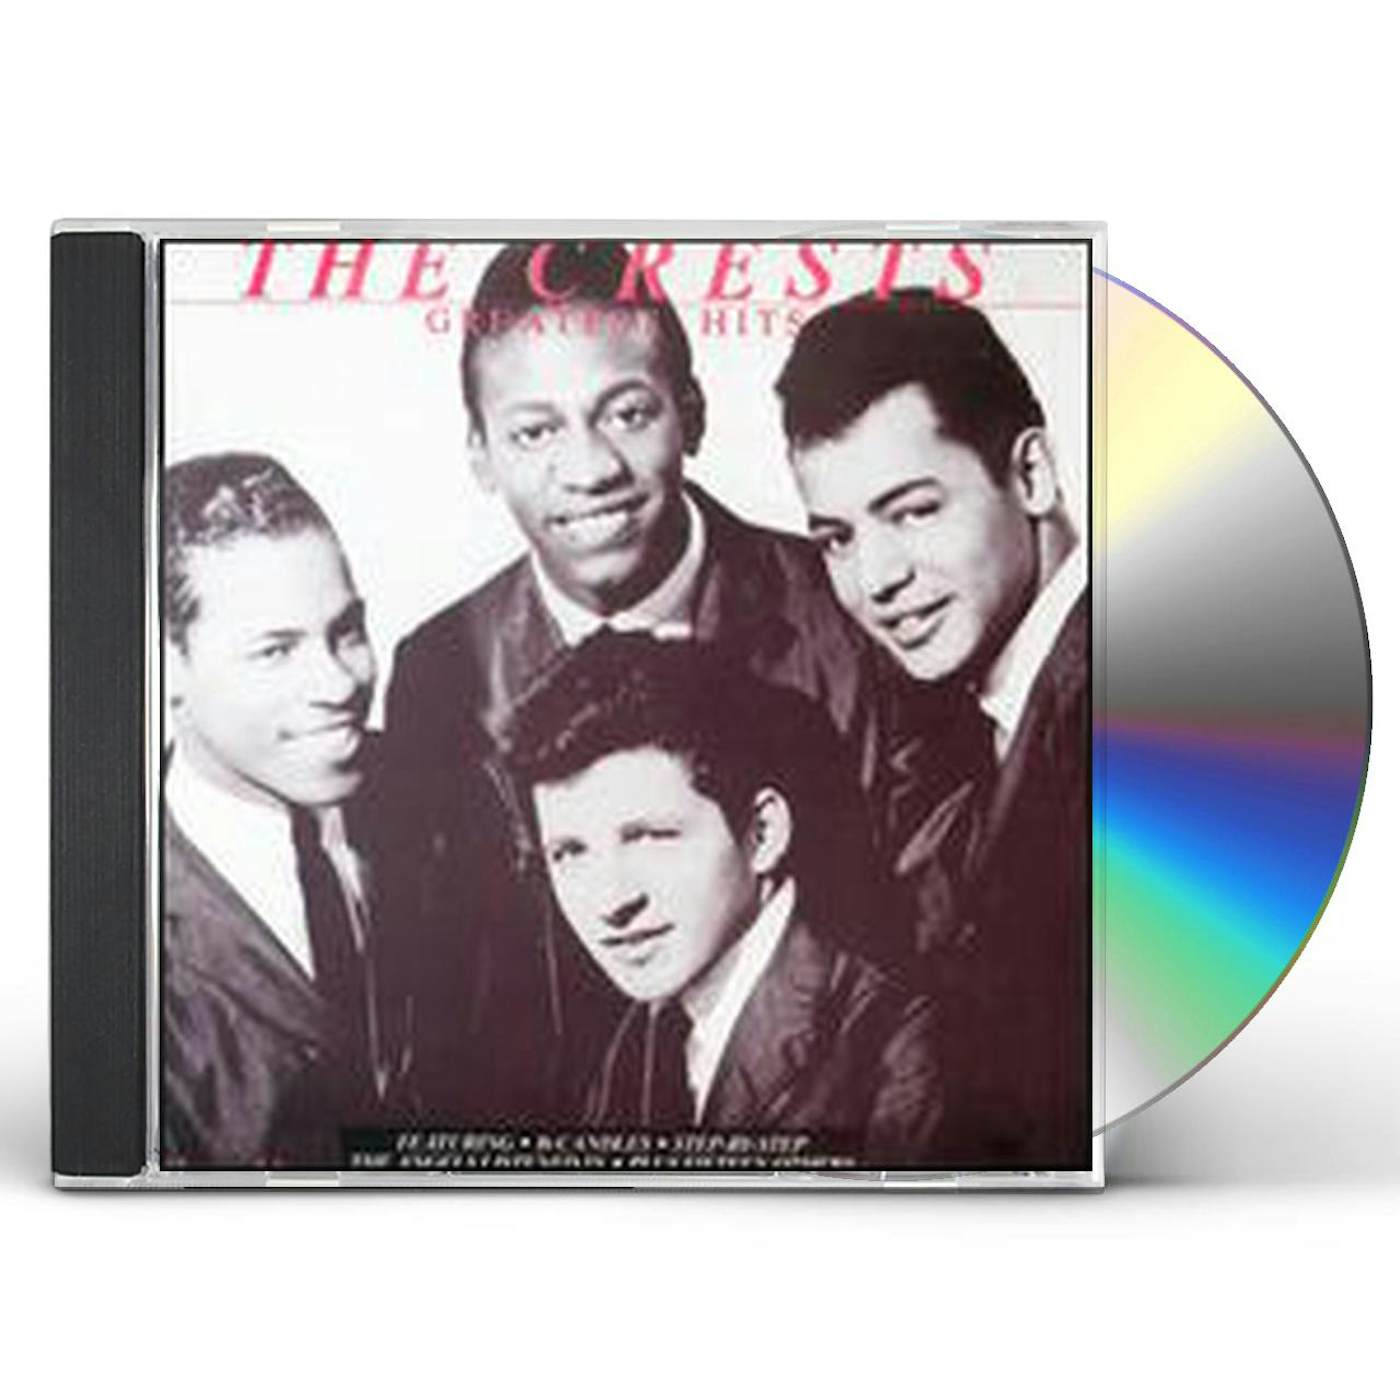 The Crests GREATEST HITS CD